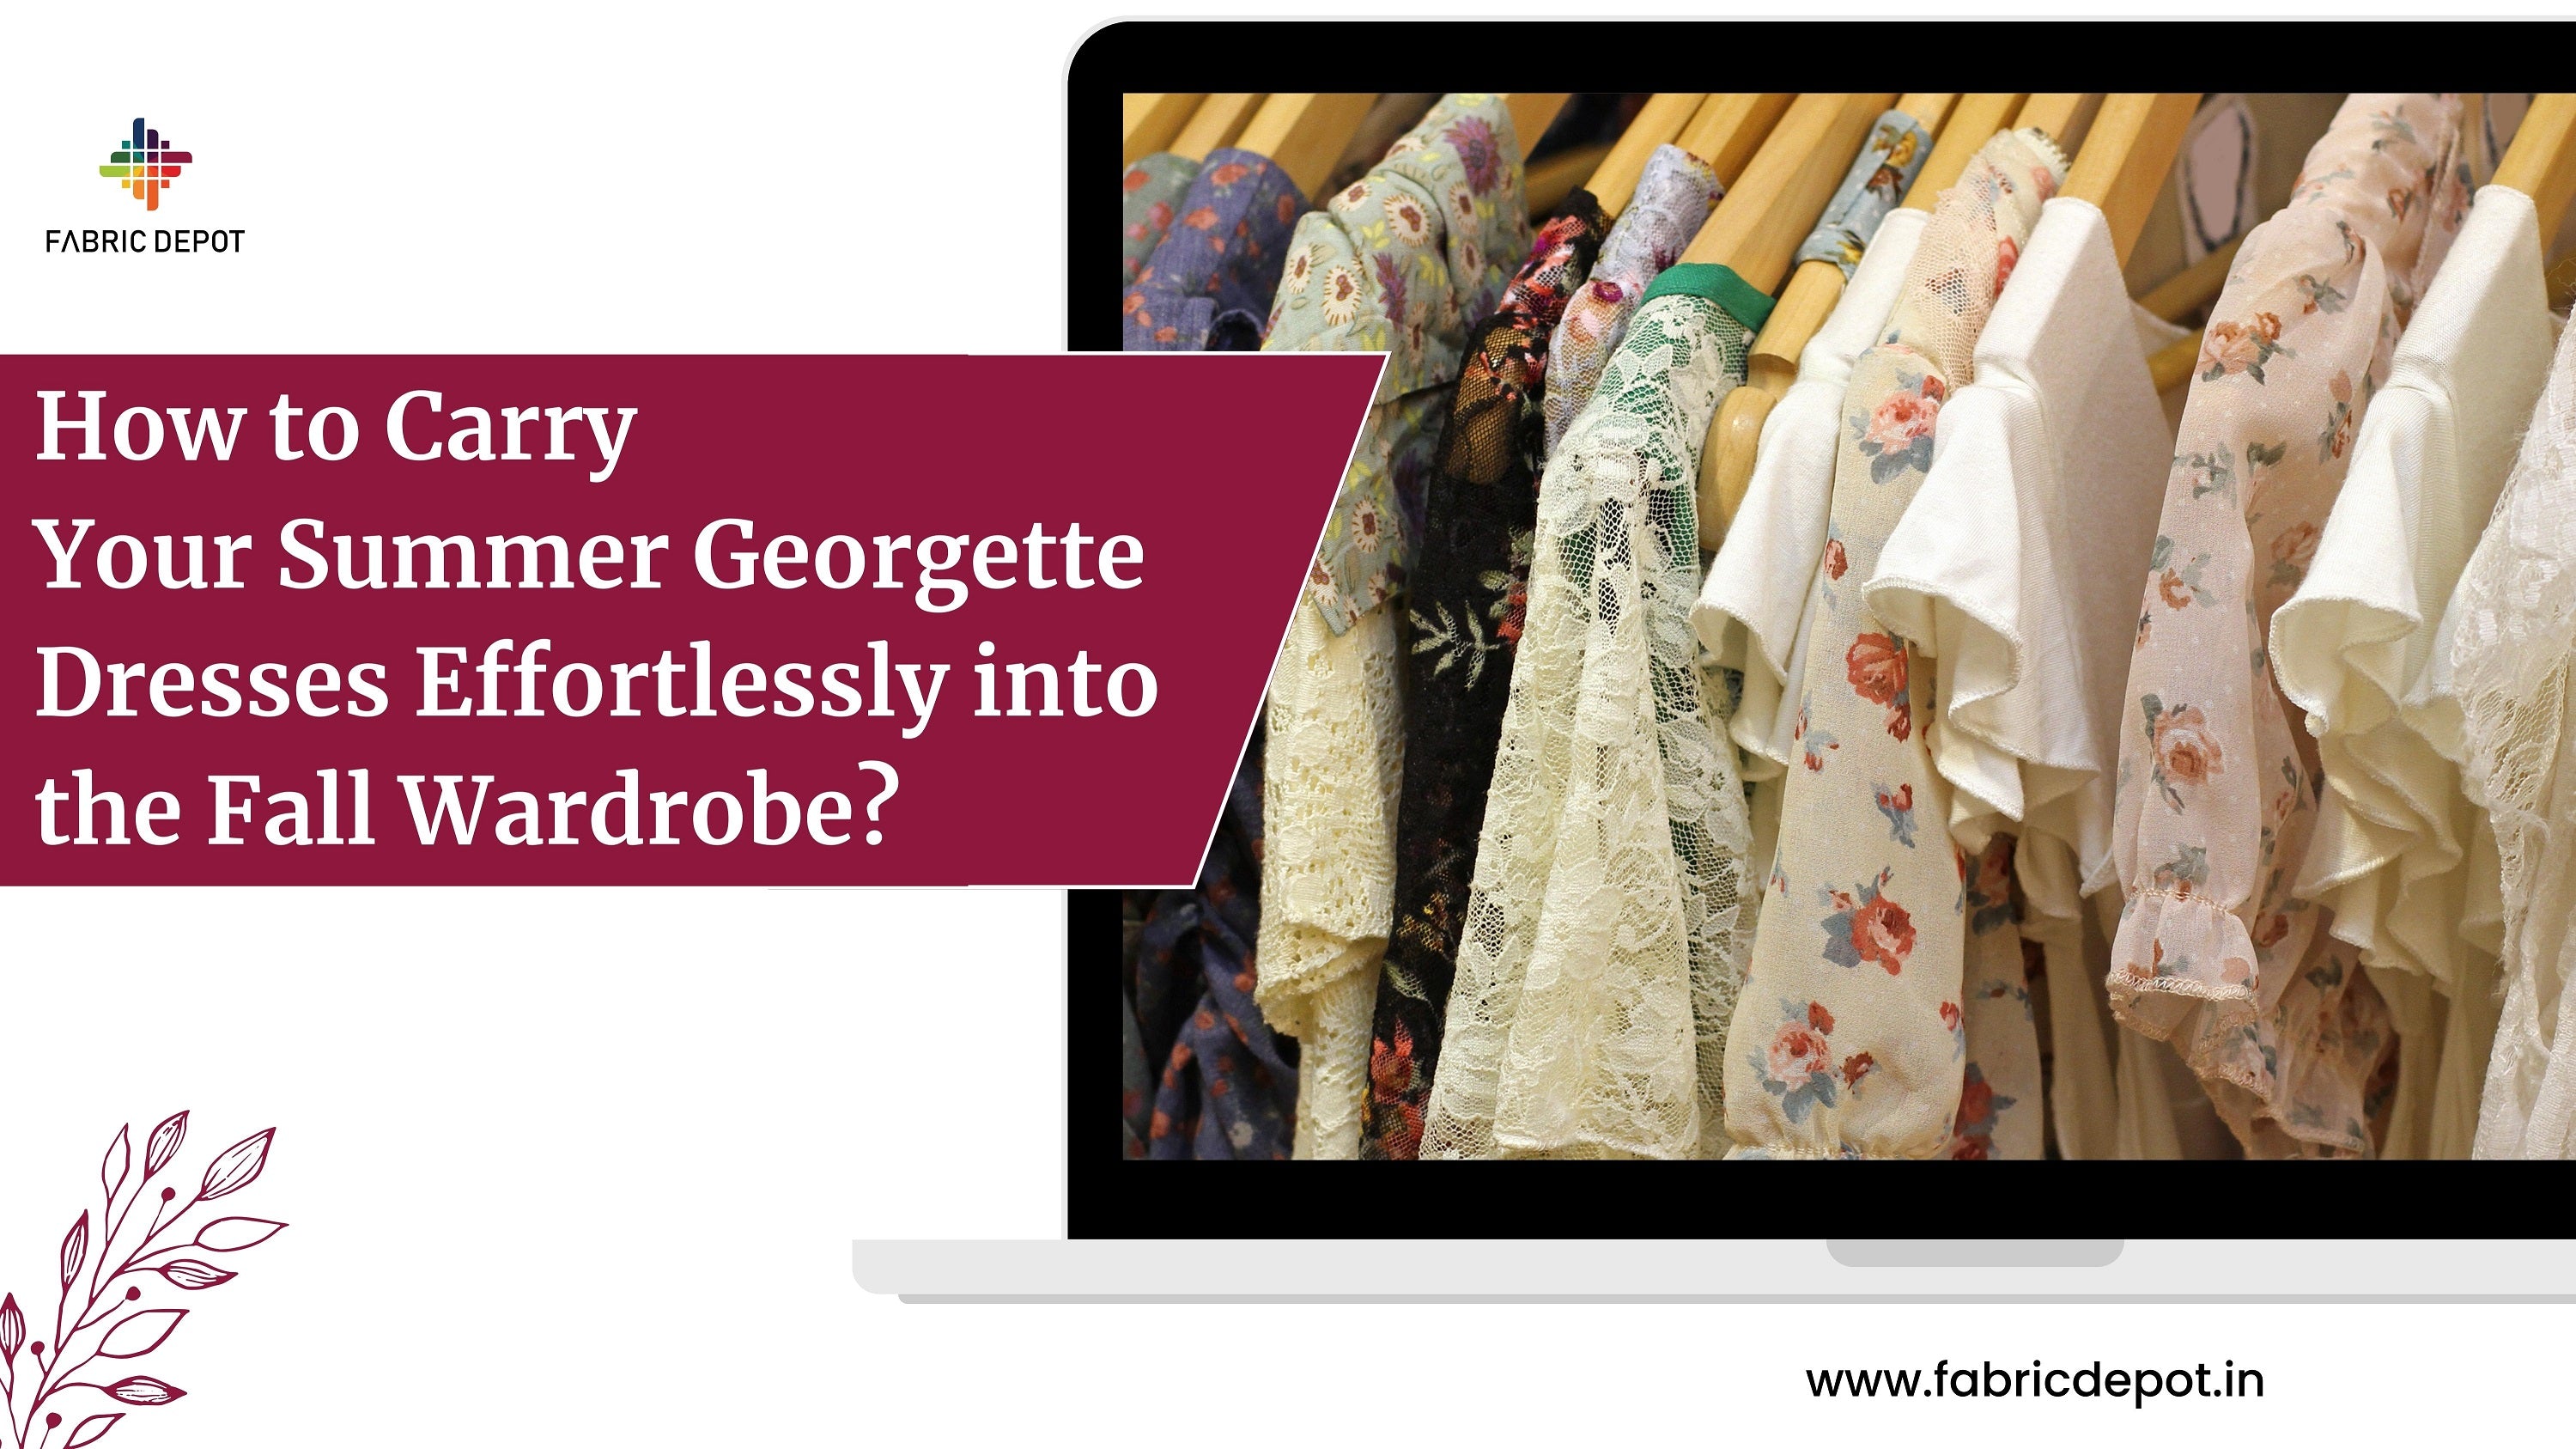 How to Carry Your Summer Georgette Dresses Effortlessly into the Fall Wardrobe?